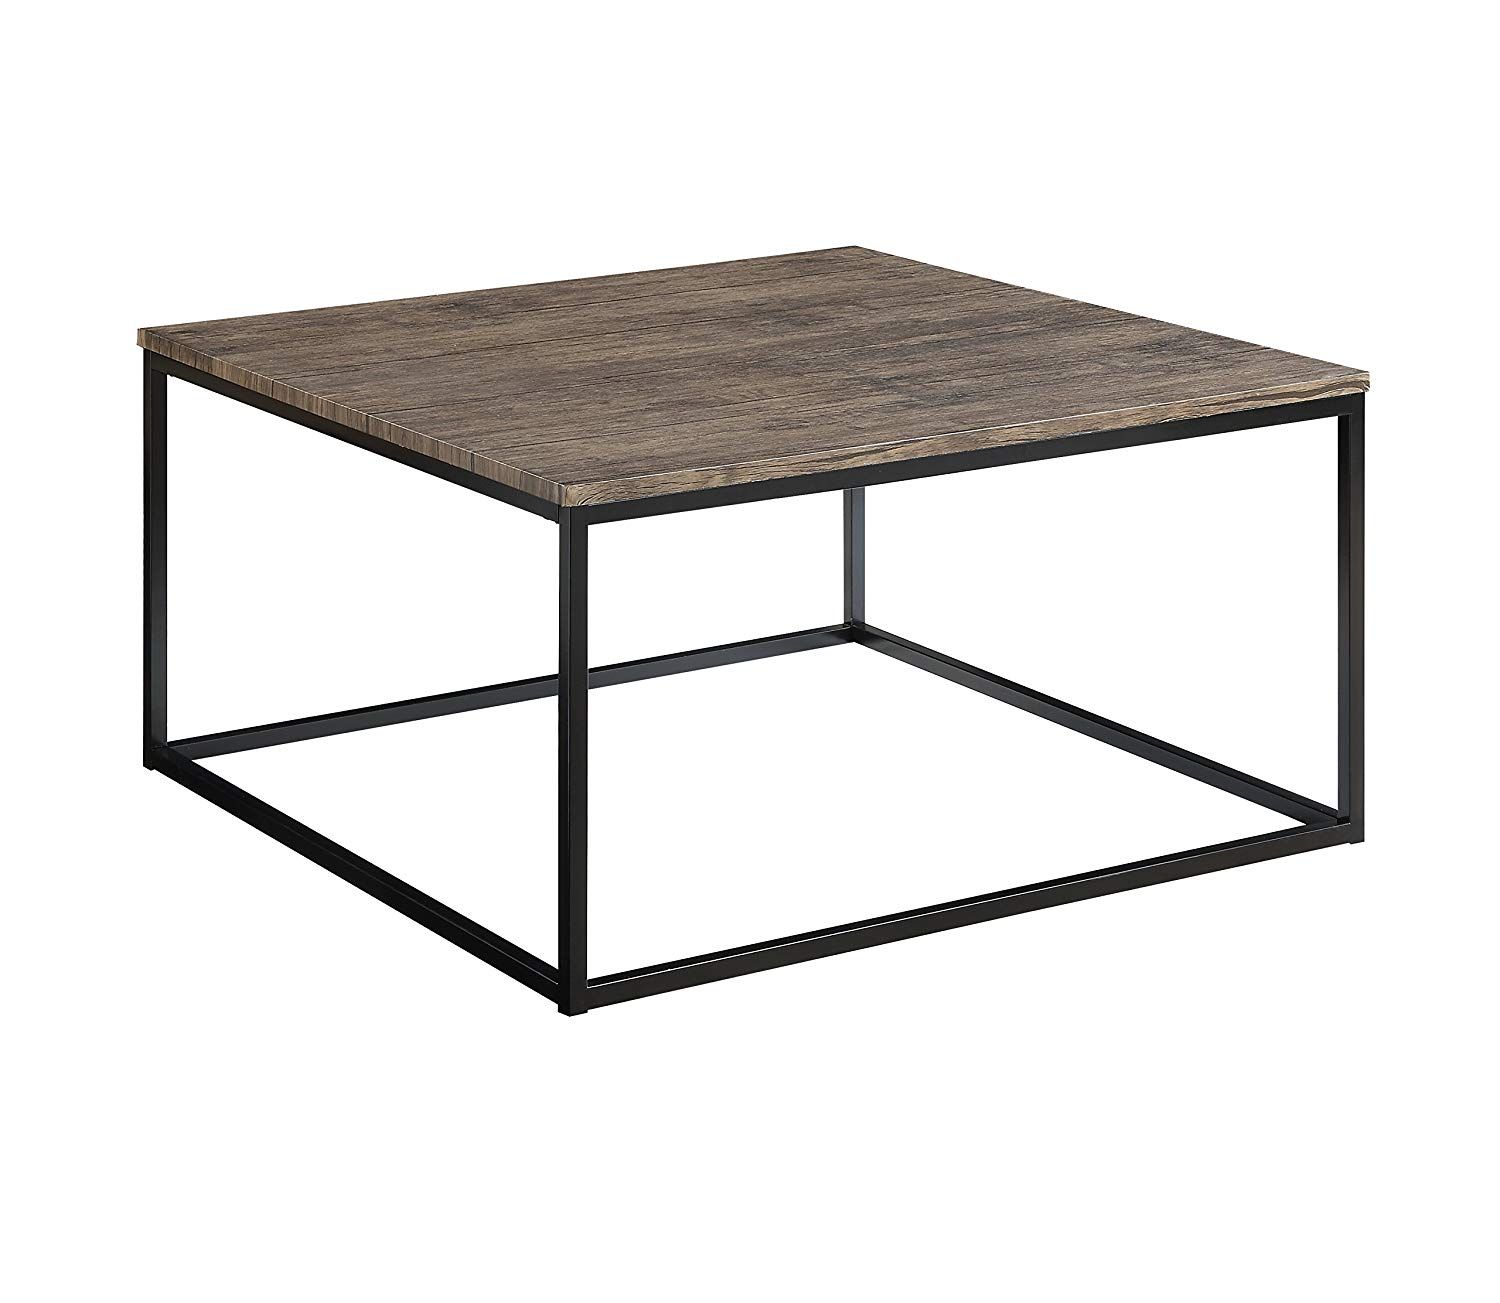 Buy Abington Lane Contemporary Square Coffee Table – Modern Cocktail Inside Square Console Tables (View 13 of 20)